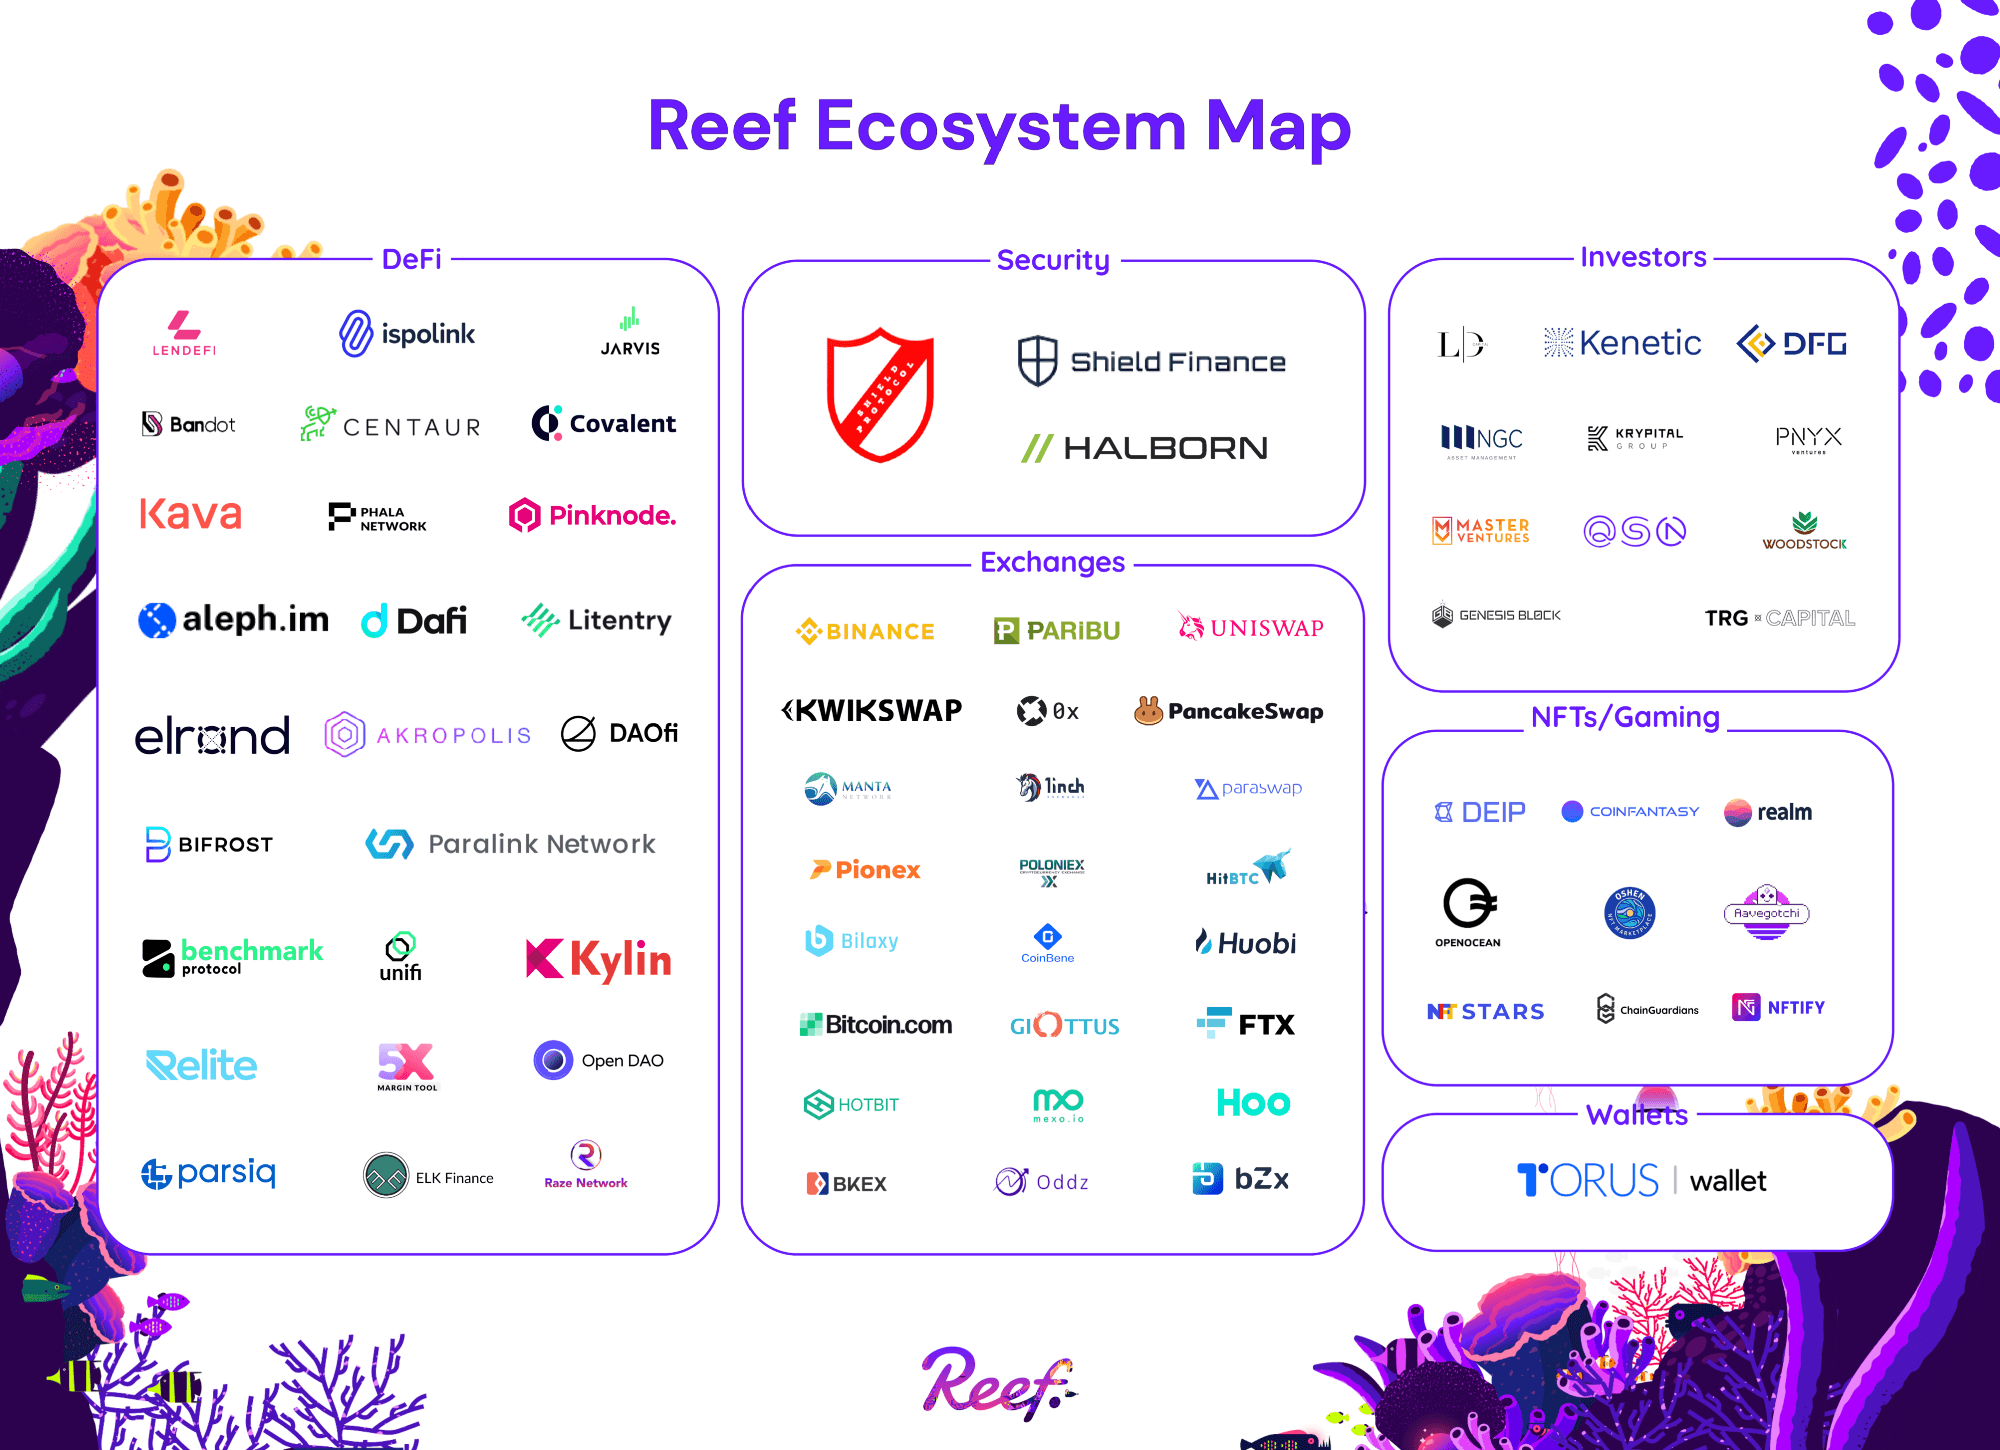 Reef Ecosystem Map | July 2021